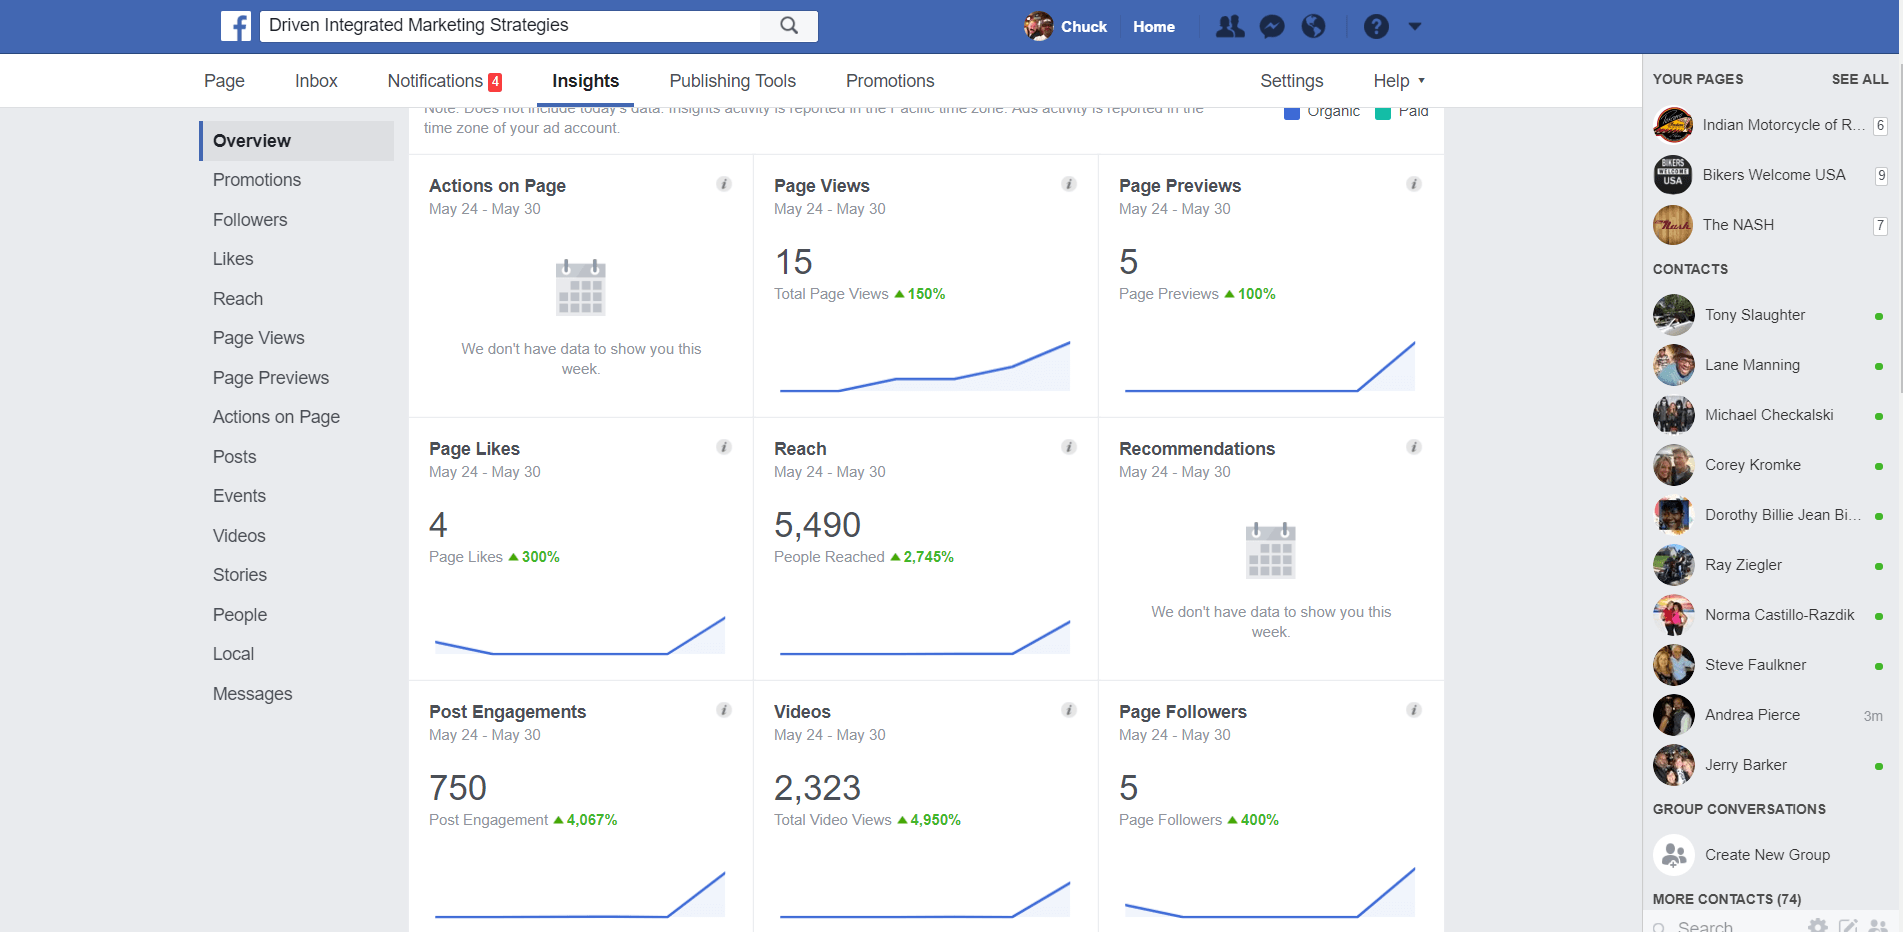 Facebook Analytic Reports| Page Views, Likes...etc